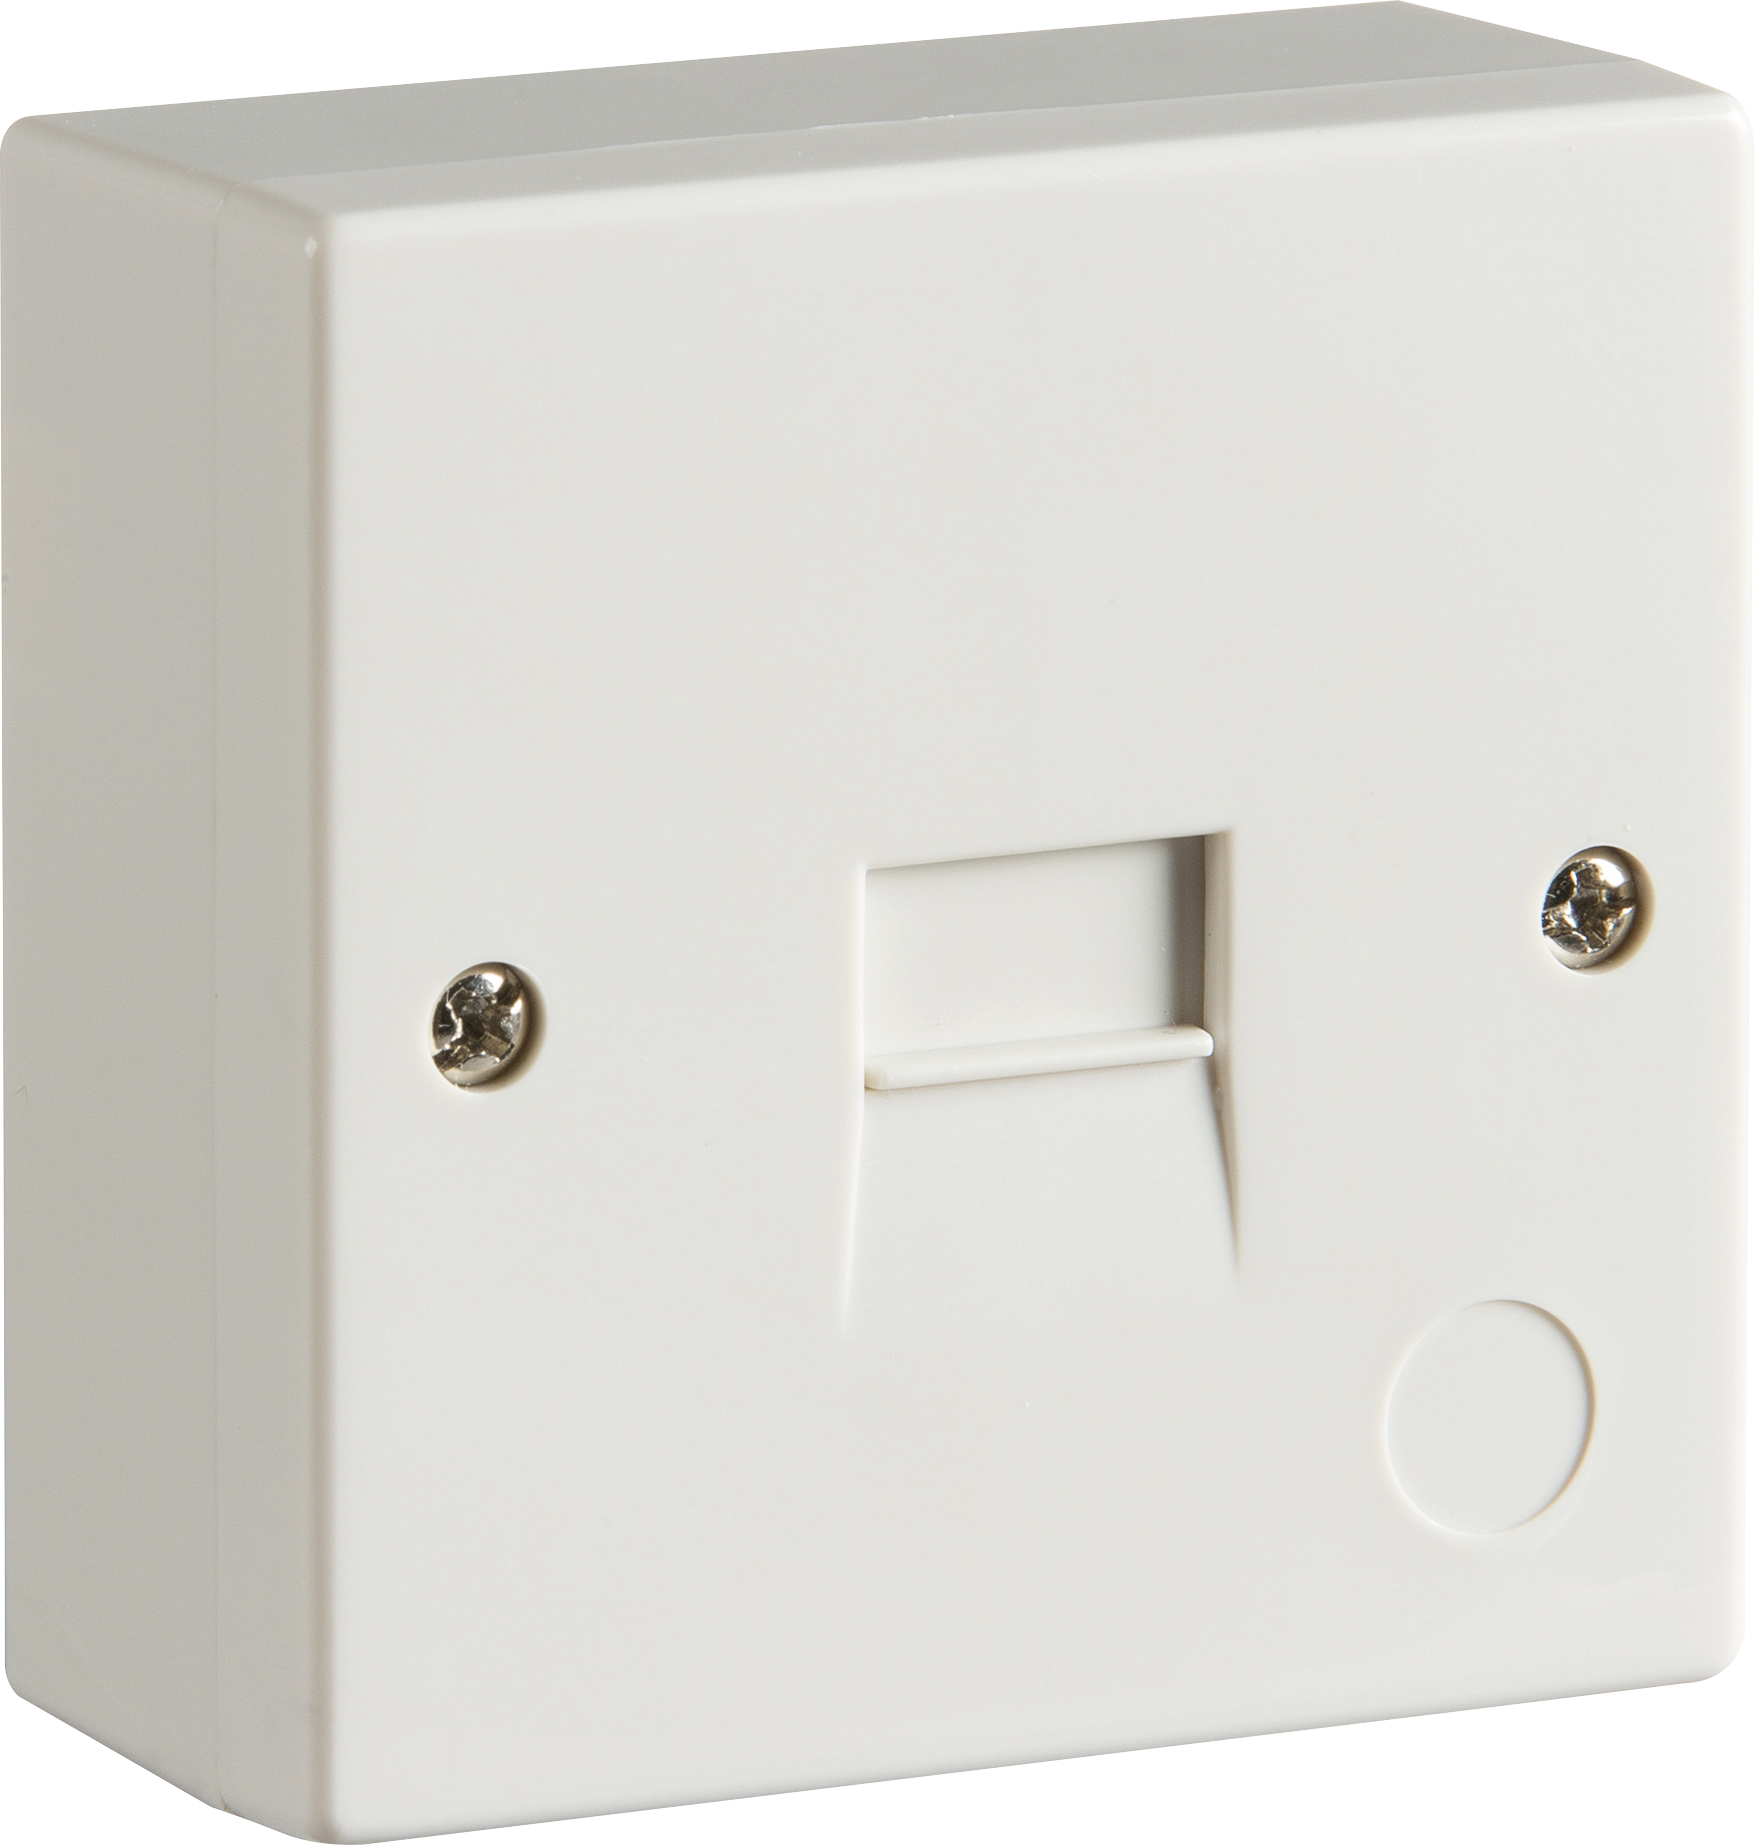 2/3A Surface Mount Telephone Extension Socket (IDC) - 7200 